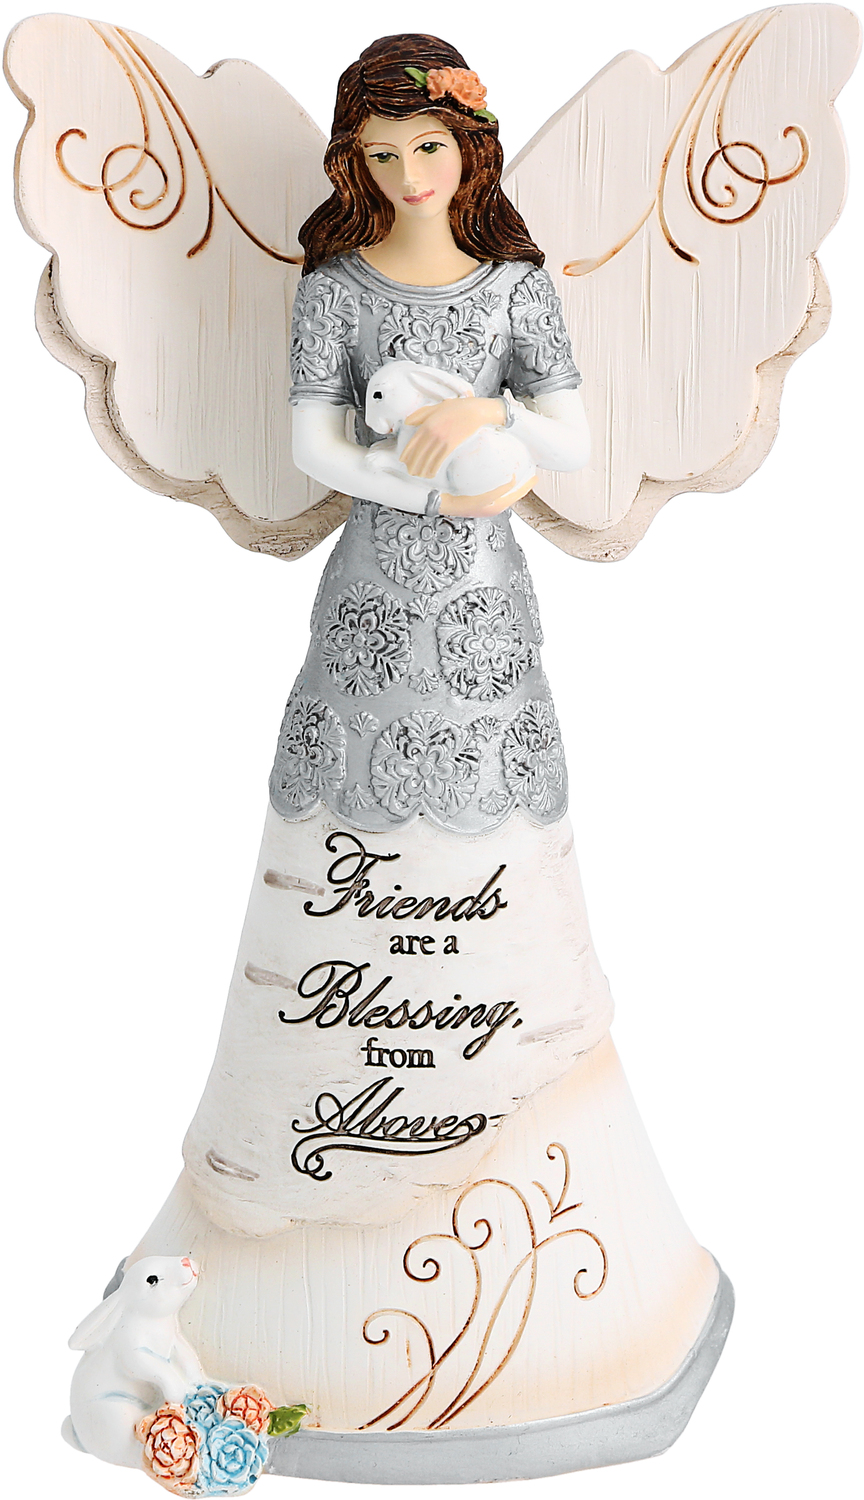 Friends are a Blessing by Elements - Friends are a Blessing - 6" Angel Holding Bunny